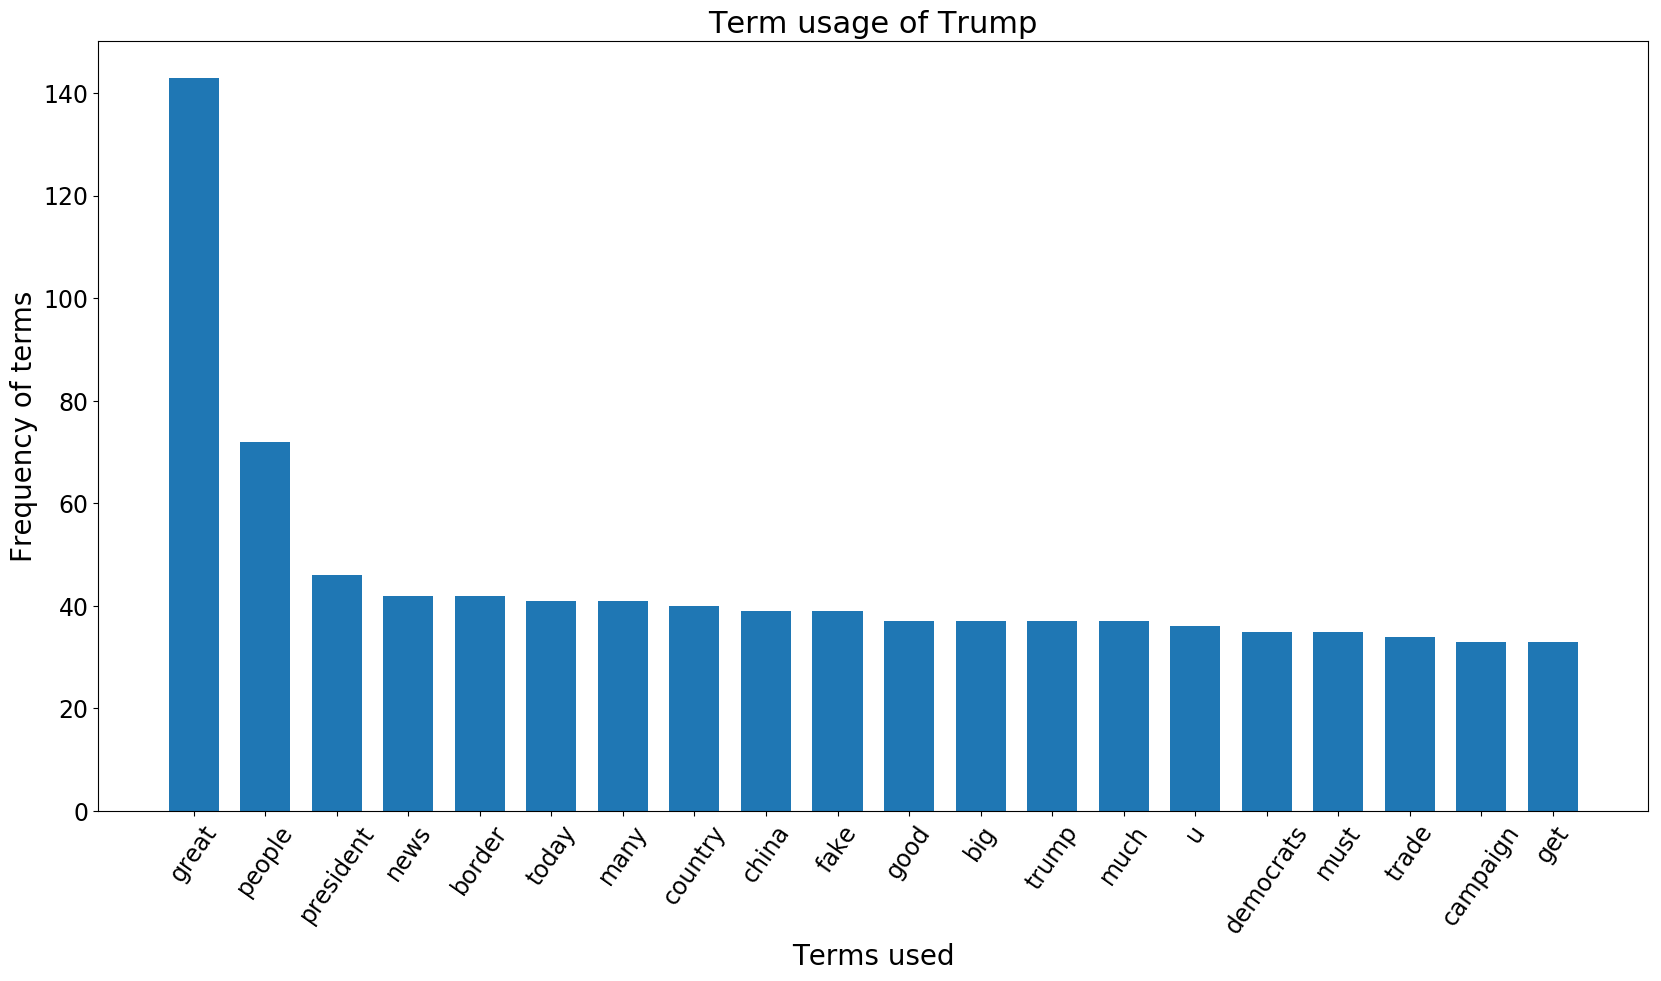 Trumps most commonly used words in his 500 most recent tweets